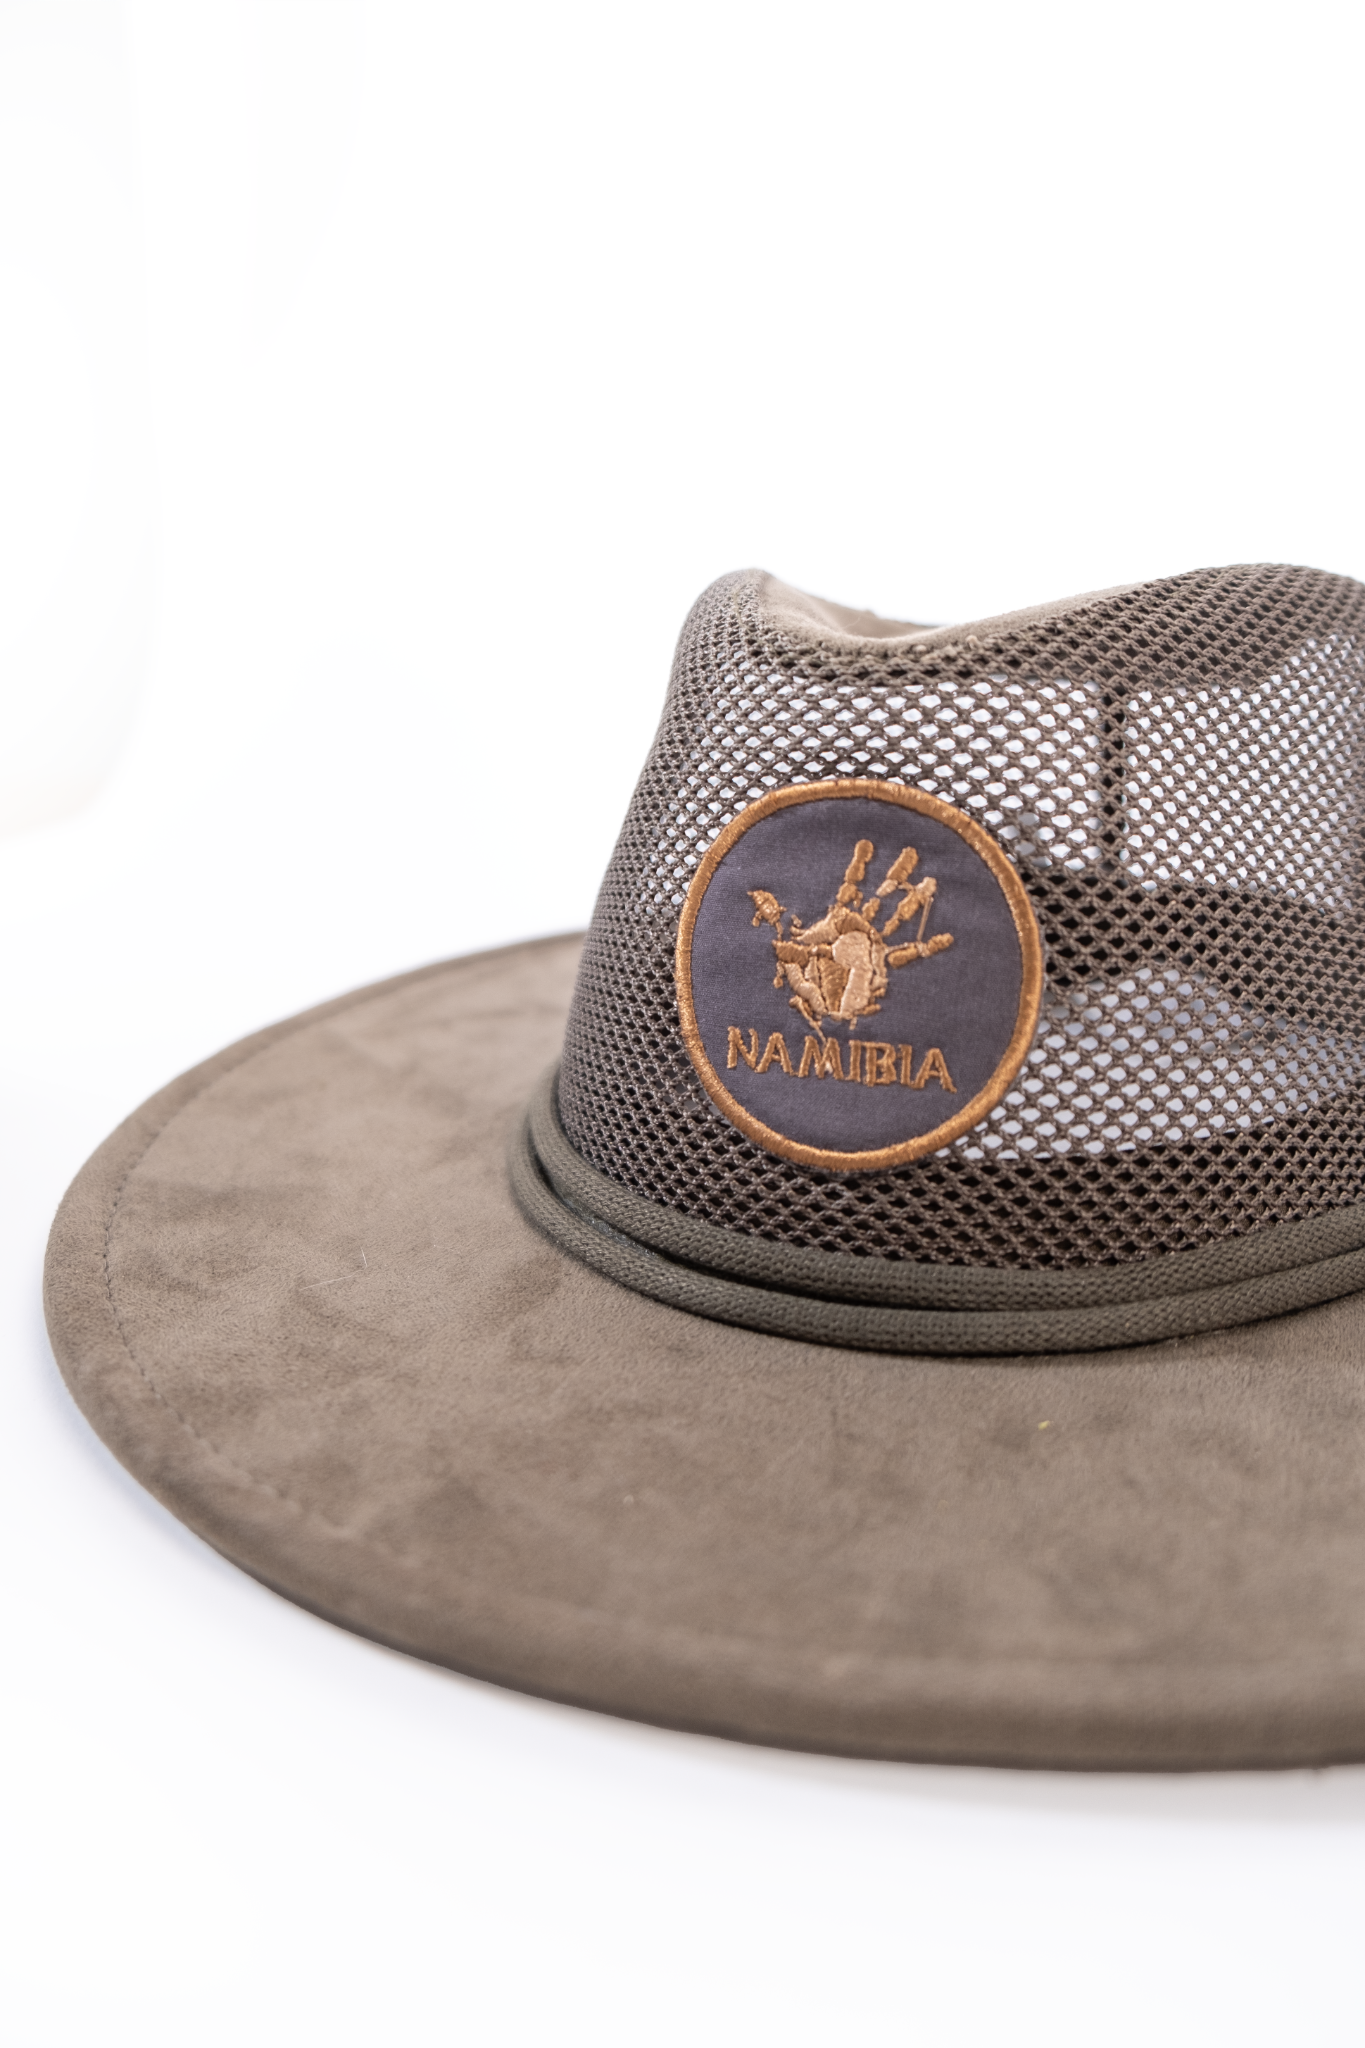 Net Top brim Hat - Namibia embroidered olive